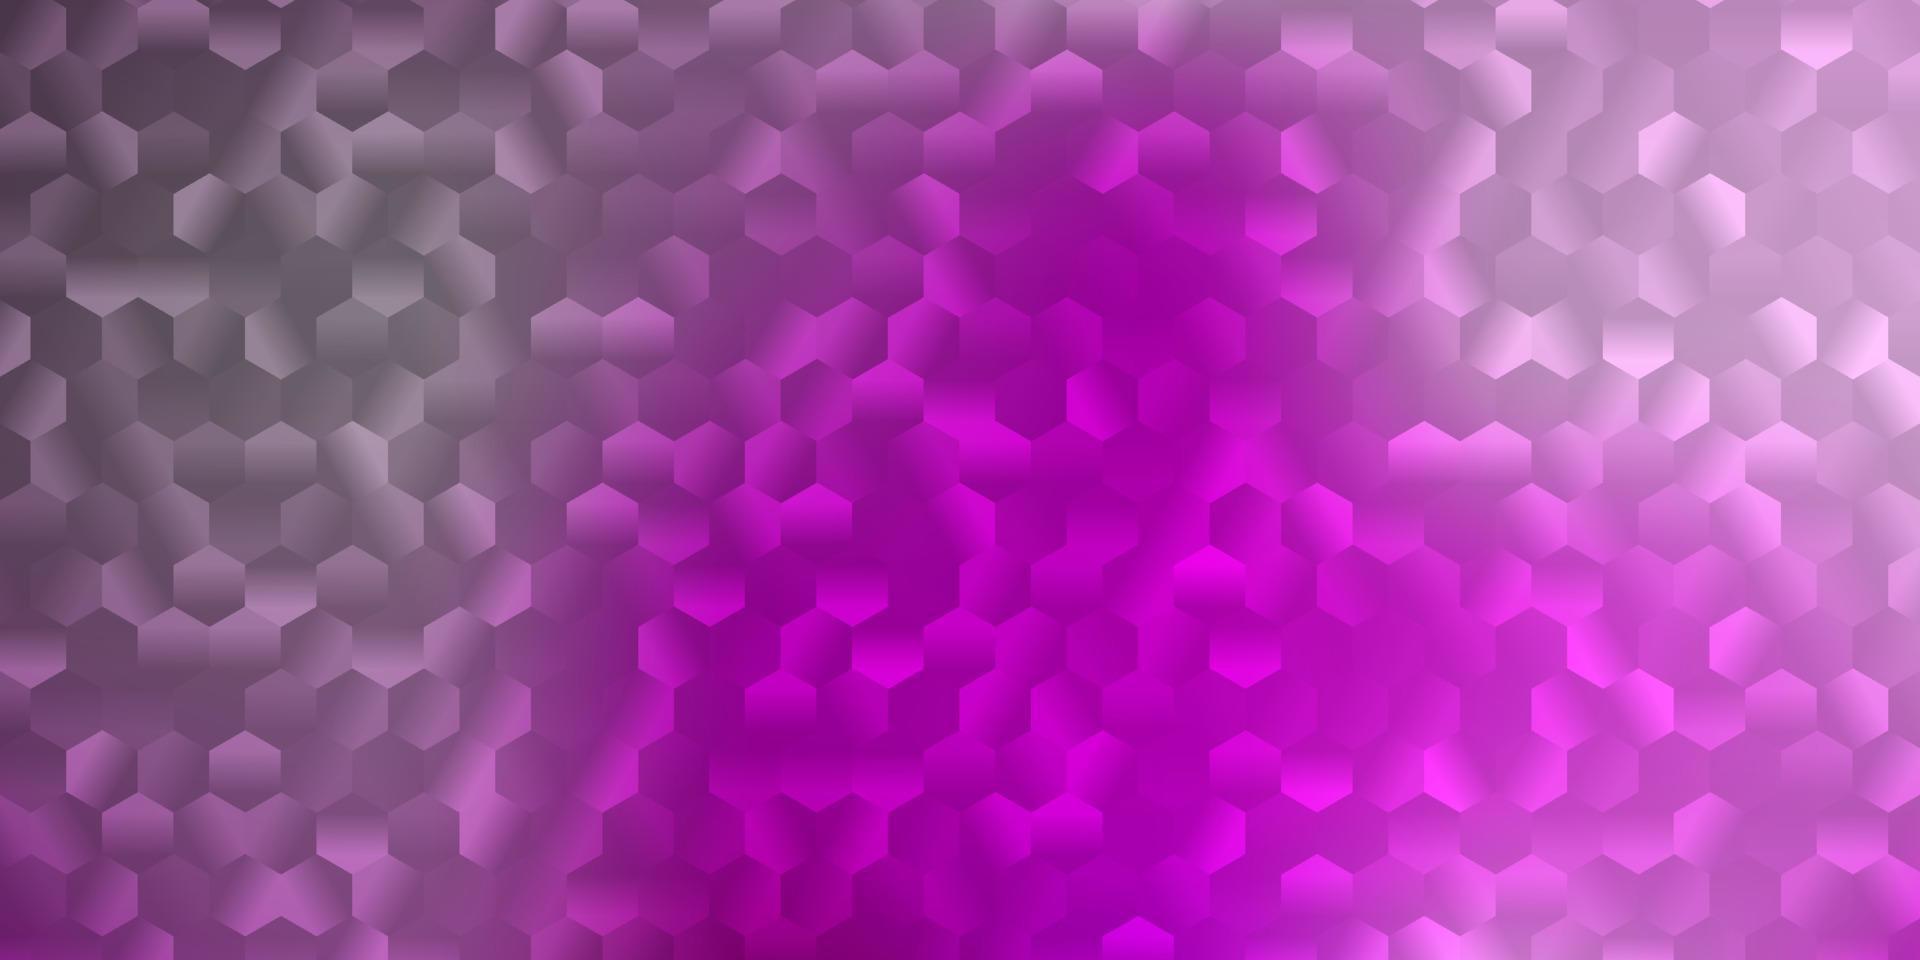 Light purple, pink vector pattern with hexagons.